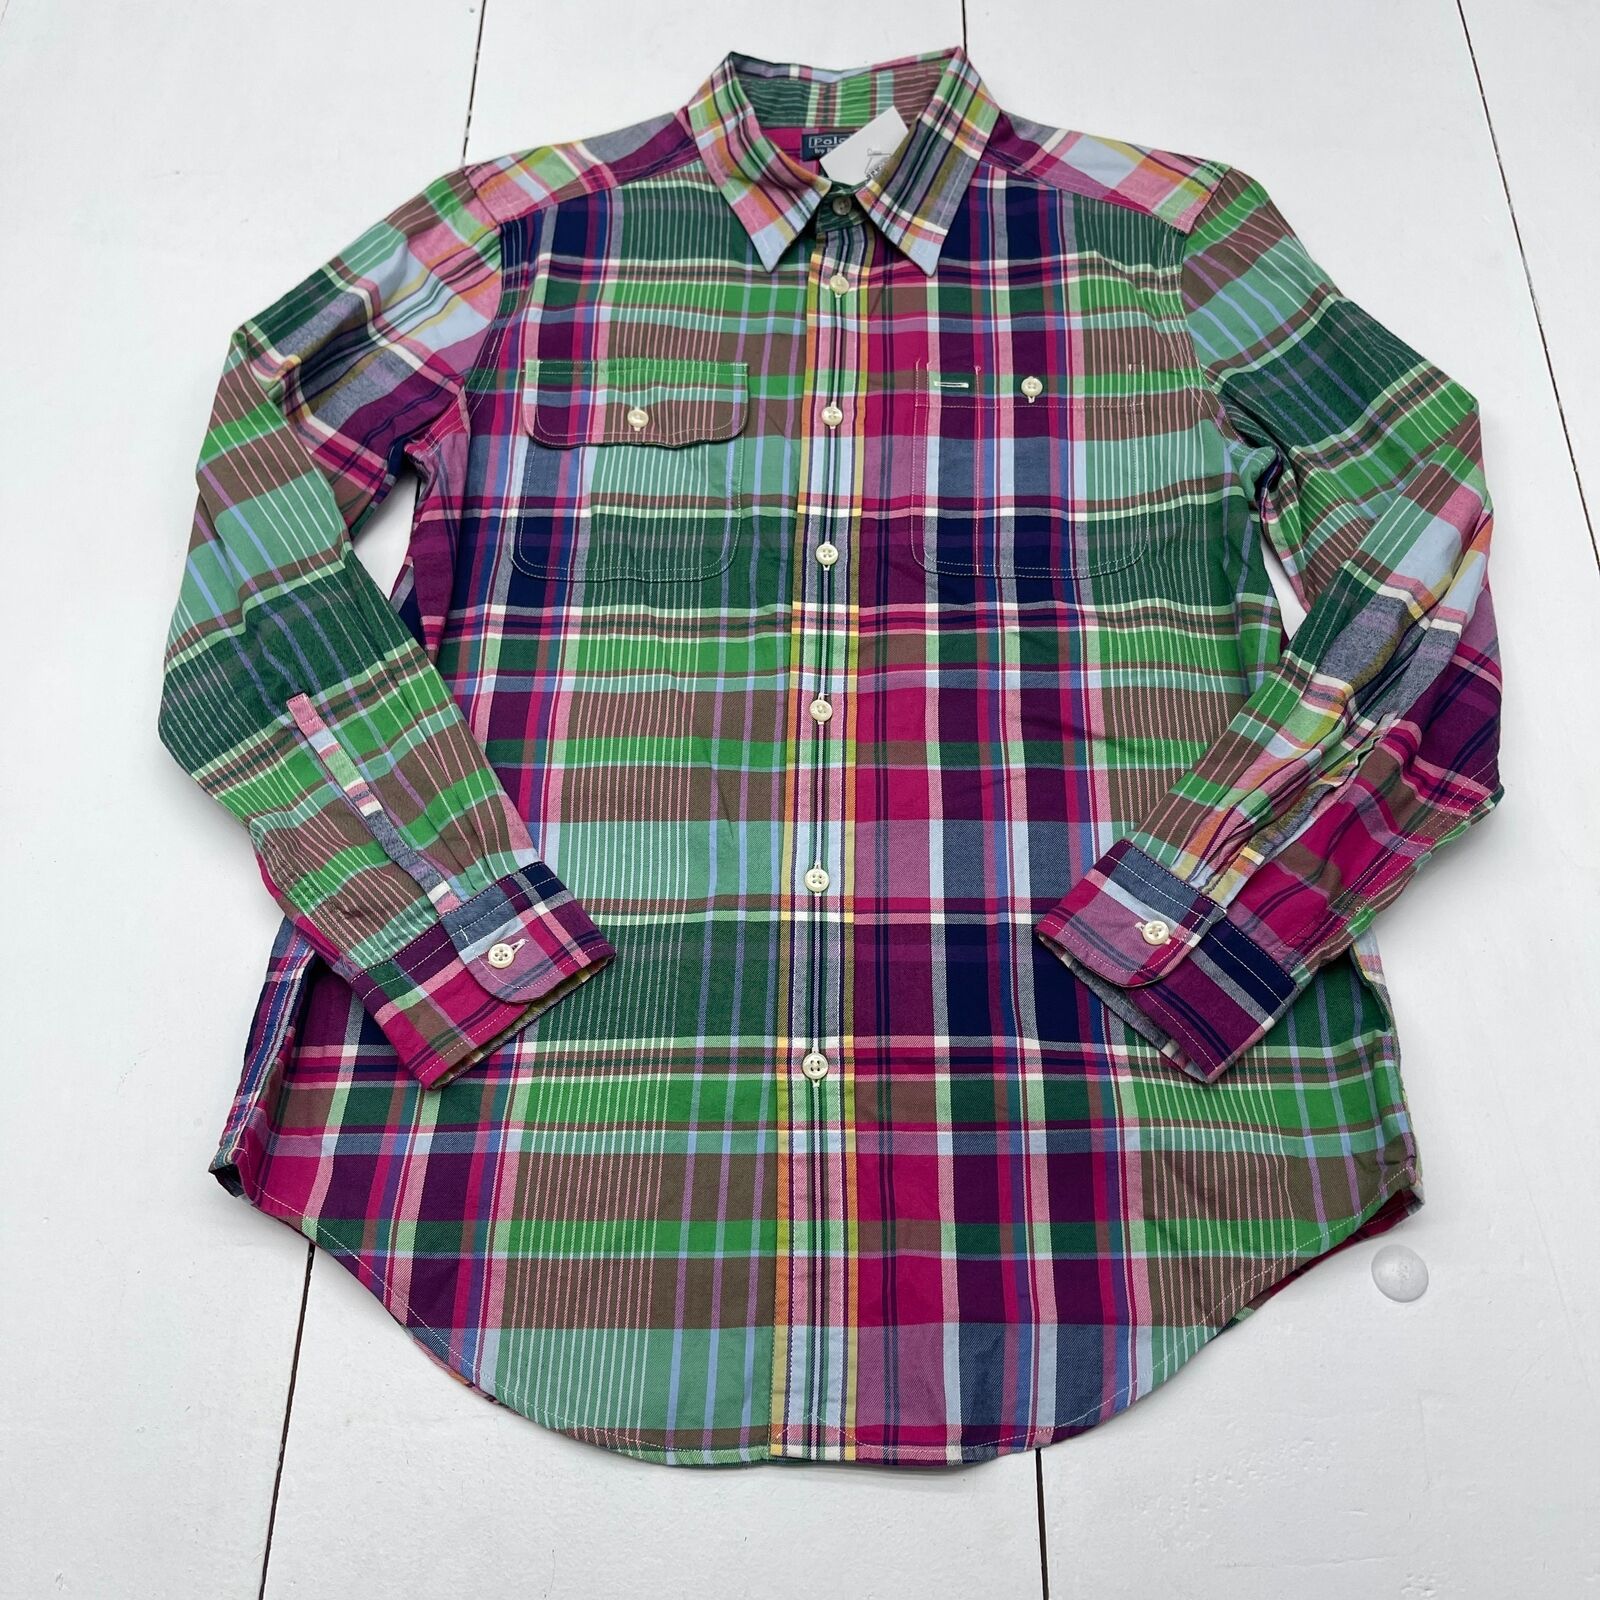 Polo Ralph Lauren Multicolored Plaid Long Sleeve Button Down Youth Boys Size Lar